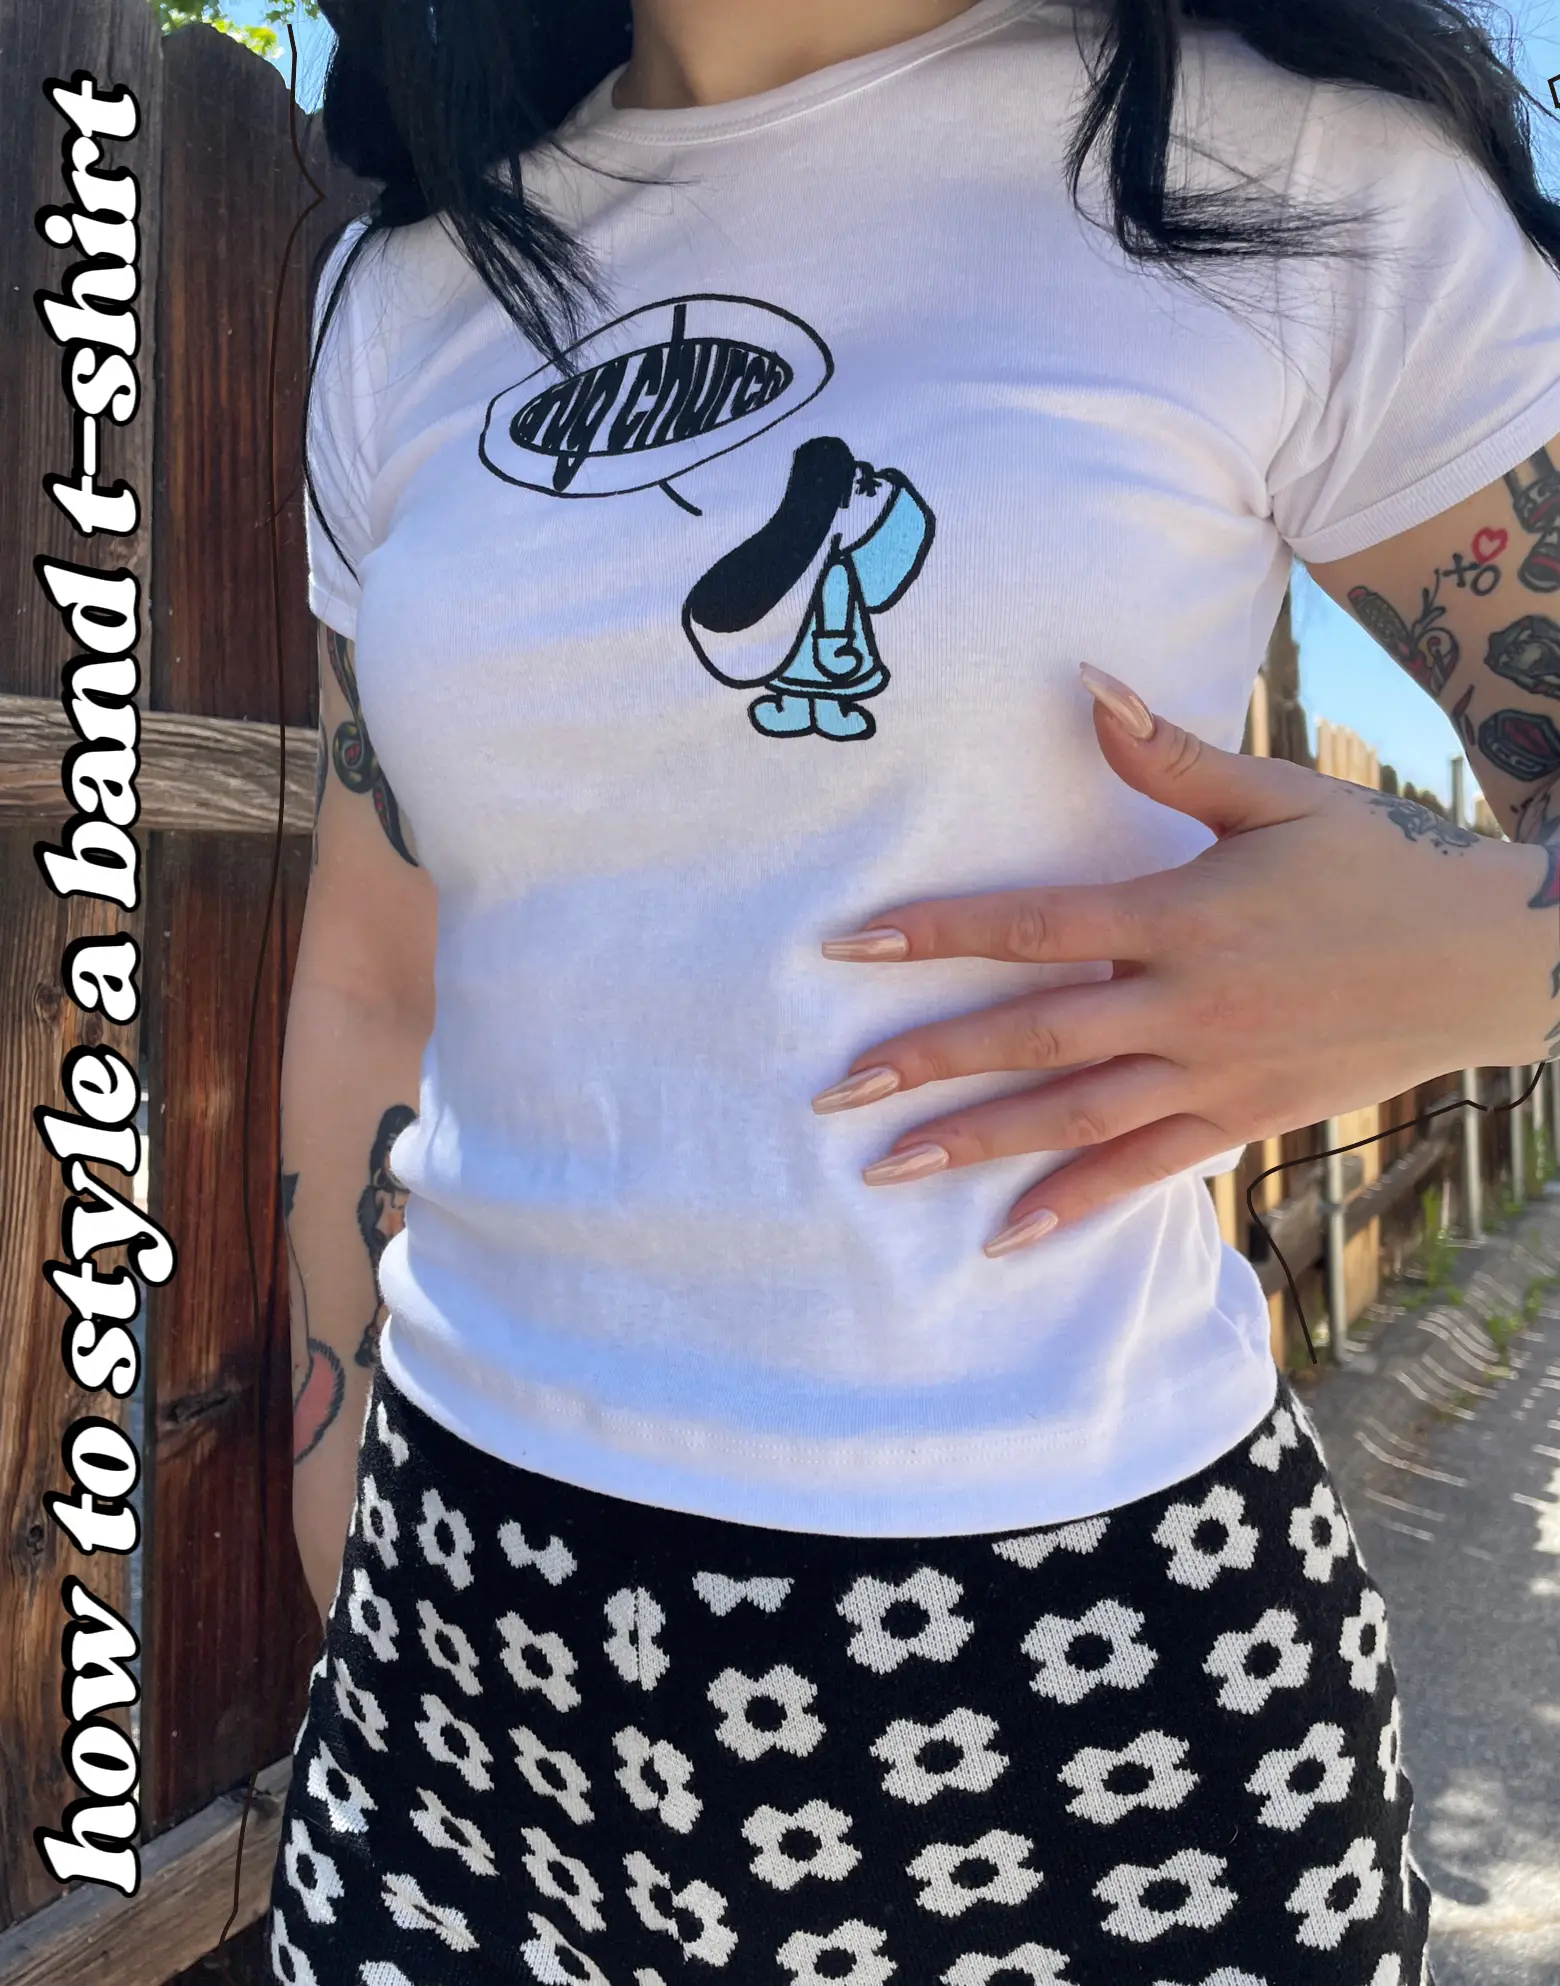 How to Style a Band T-Shirt, Gallery posted by Samantha